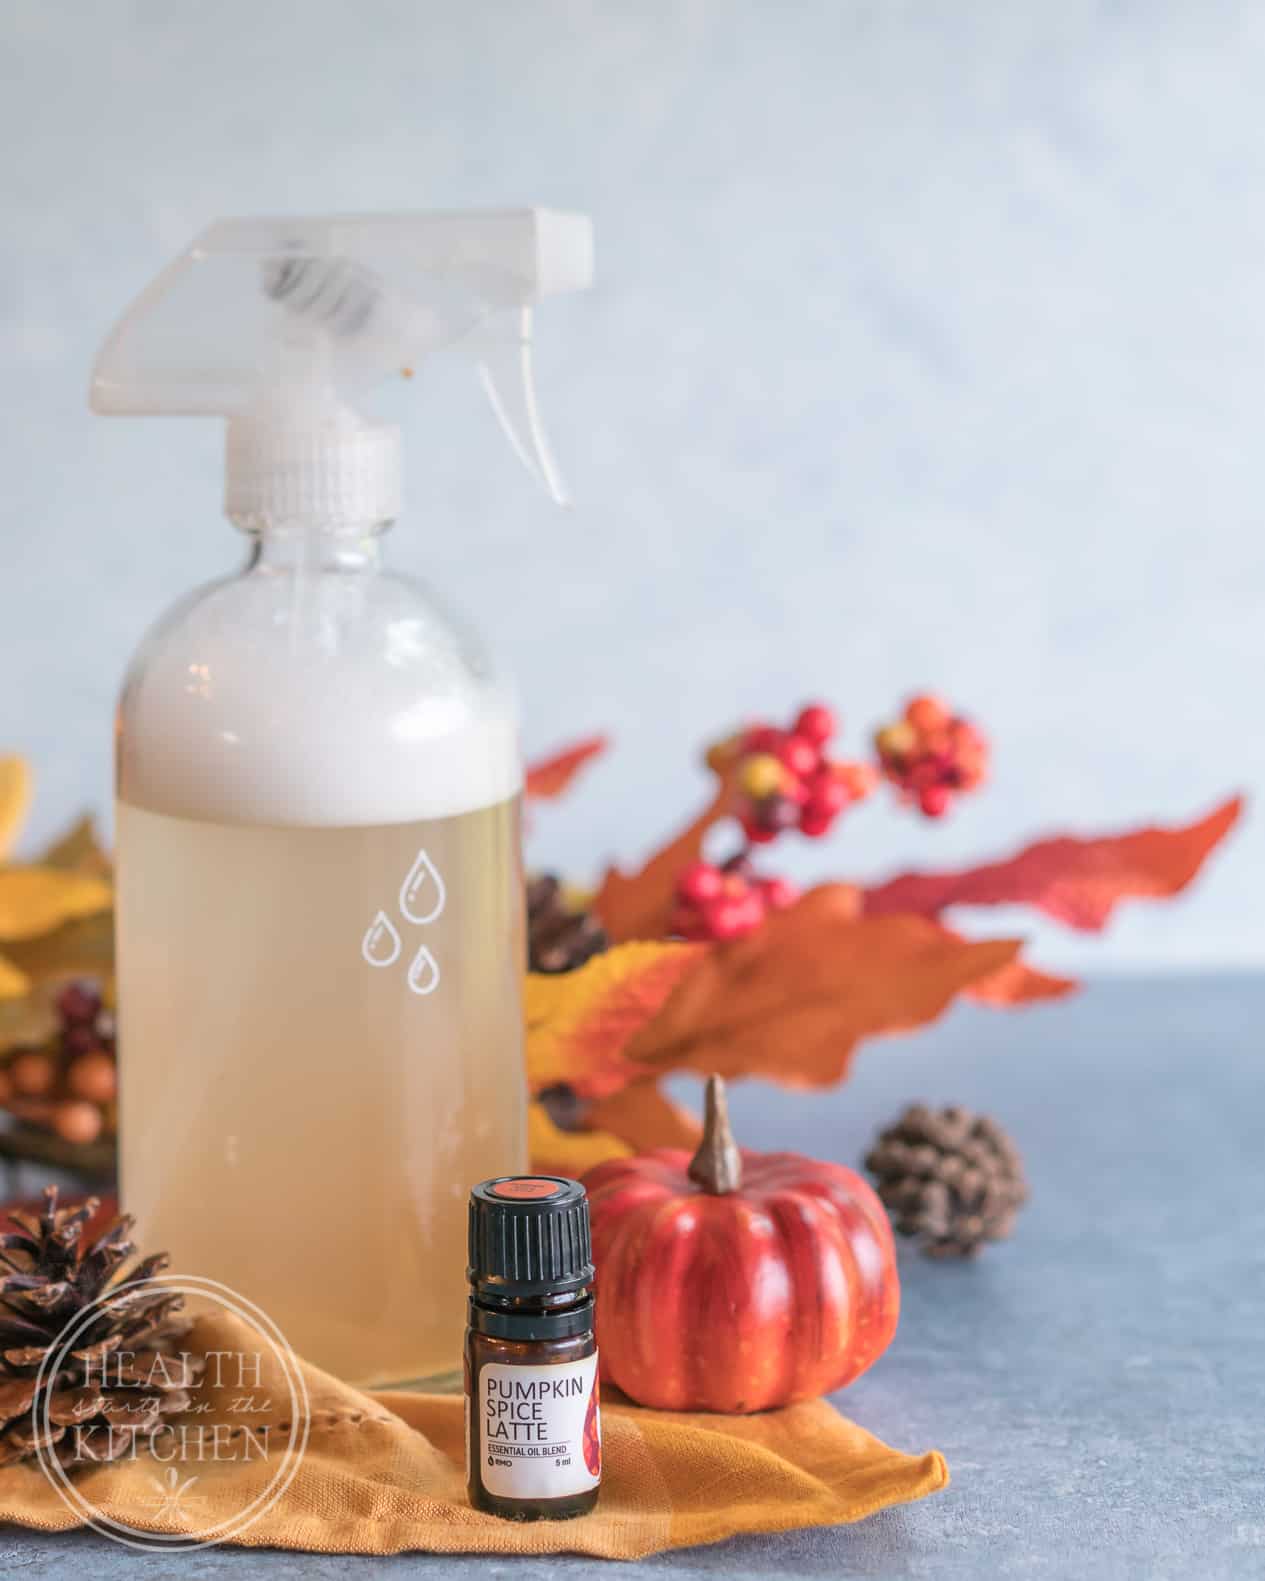 Pumpkin Spice Latte Non-Toxic Cleaning Spray